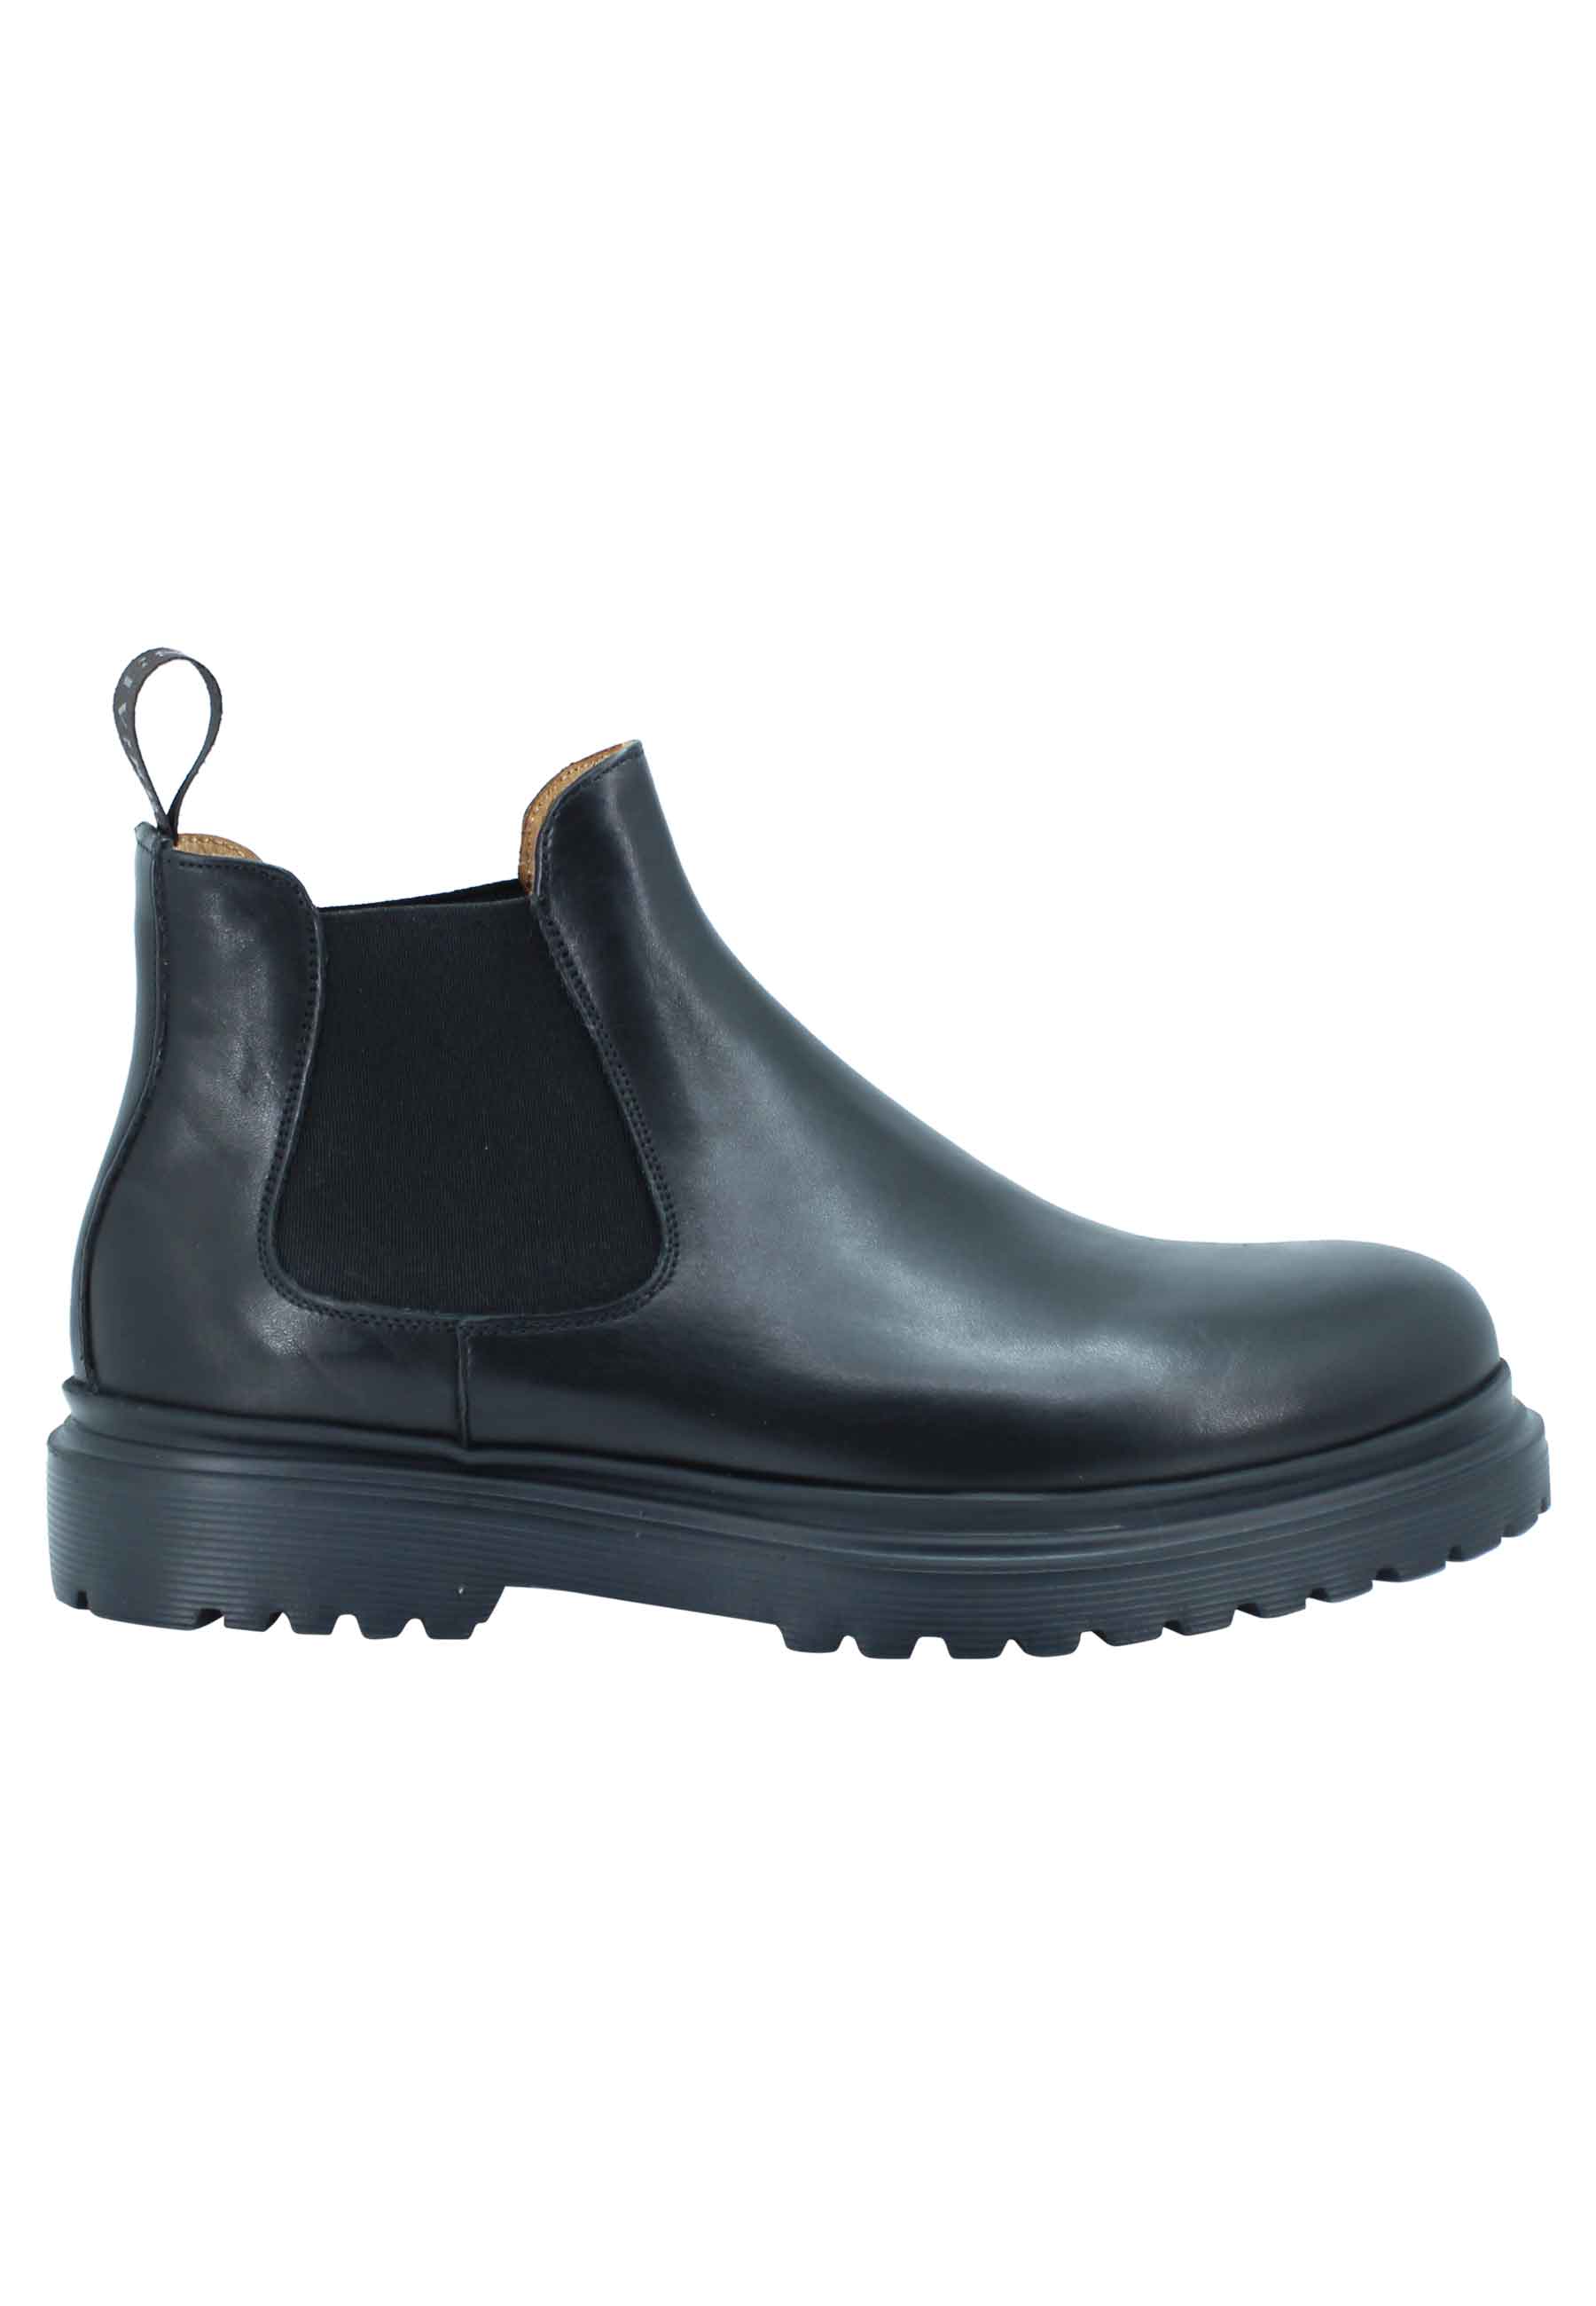 Men's Beatles ankle boots in black aged leather and lug sole